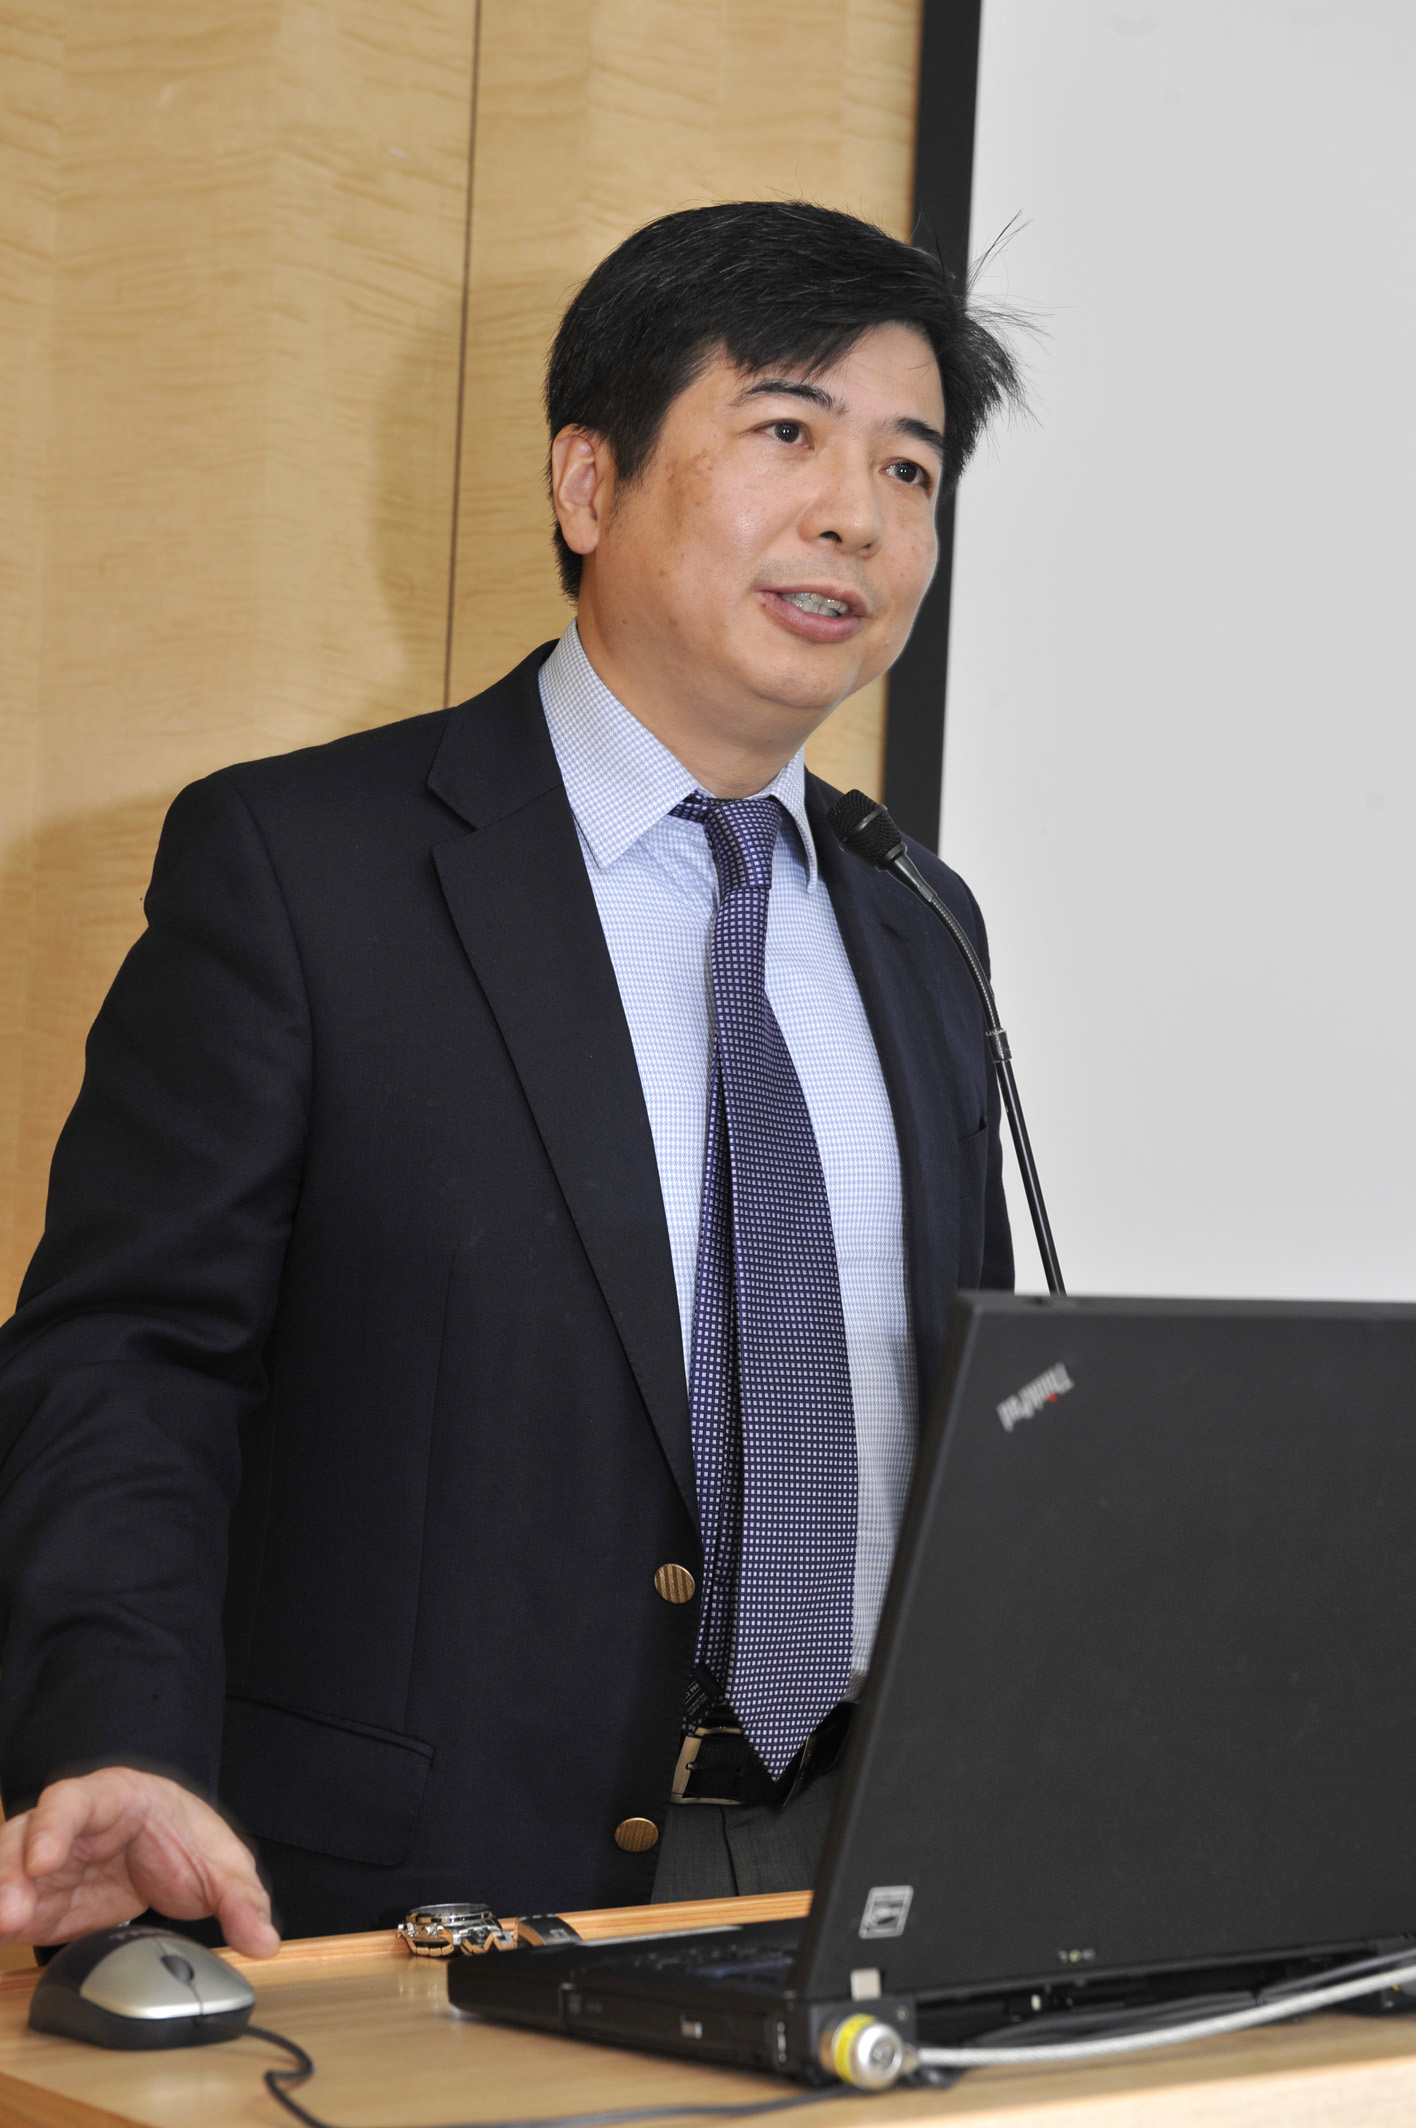 Prof. SHAM Pak Chung, Head of Department of Psychiatry, Li Ka Shing Faculty of Medicine, HKU briefed how the researchers found significant different in the frequencies of certain variants between patients and people without epilepsy and found a gene called CAMSAP1L1 which may affect how nerve cells in the brain grow to form connection and networks with each other